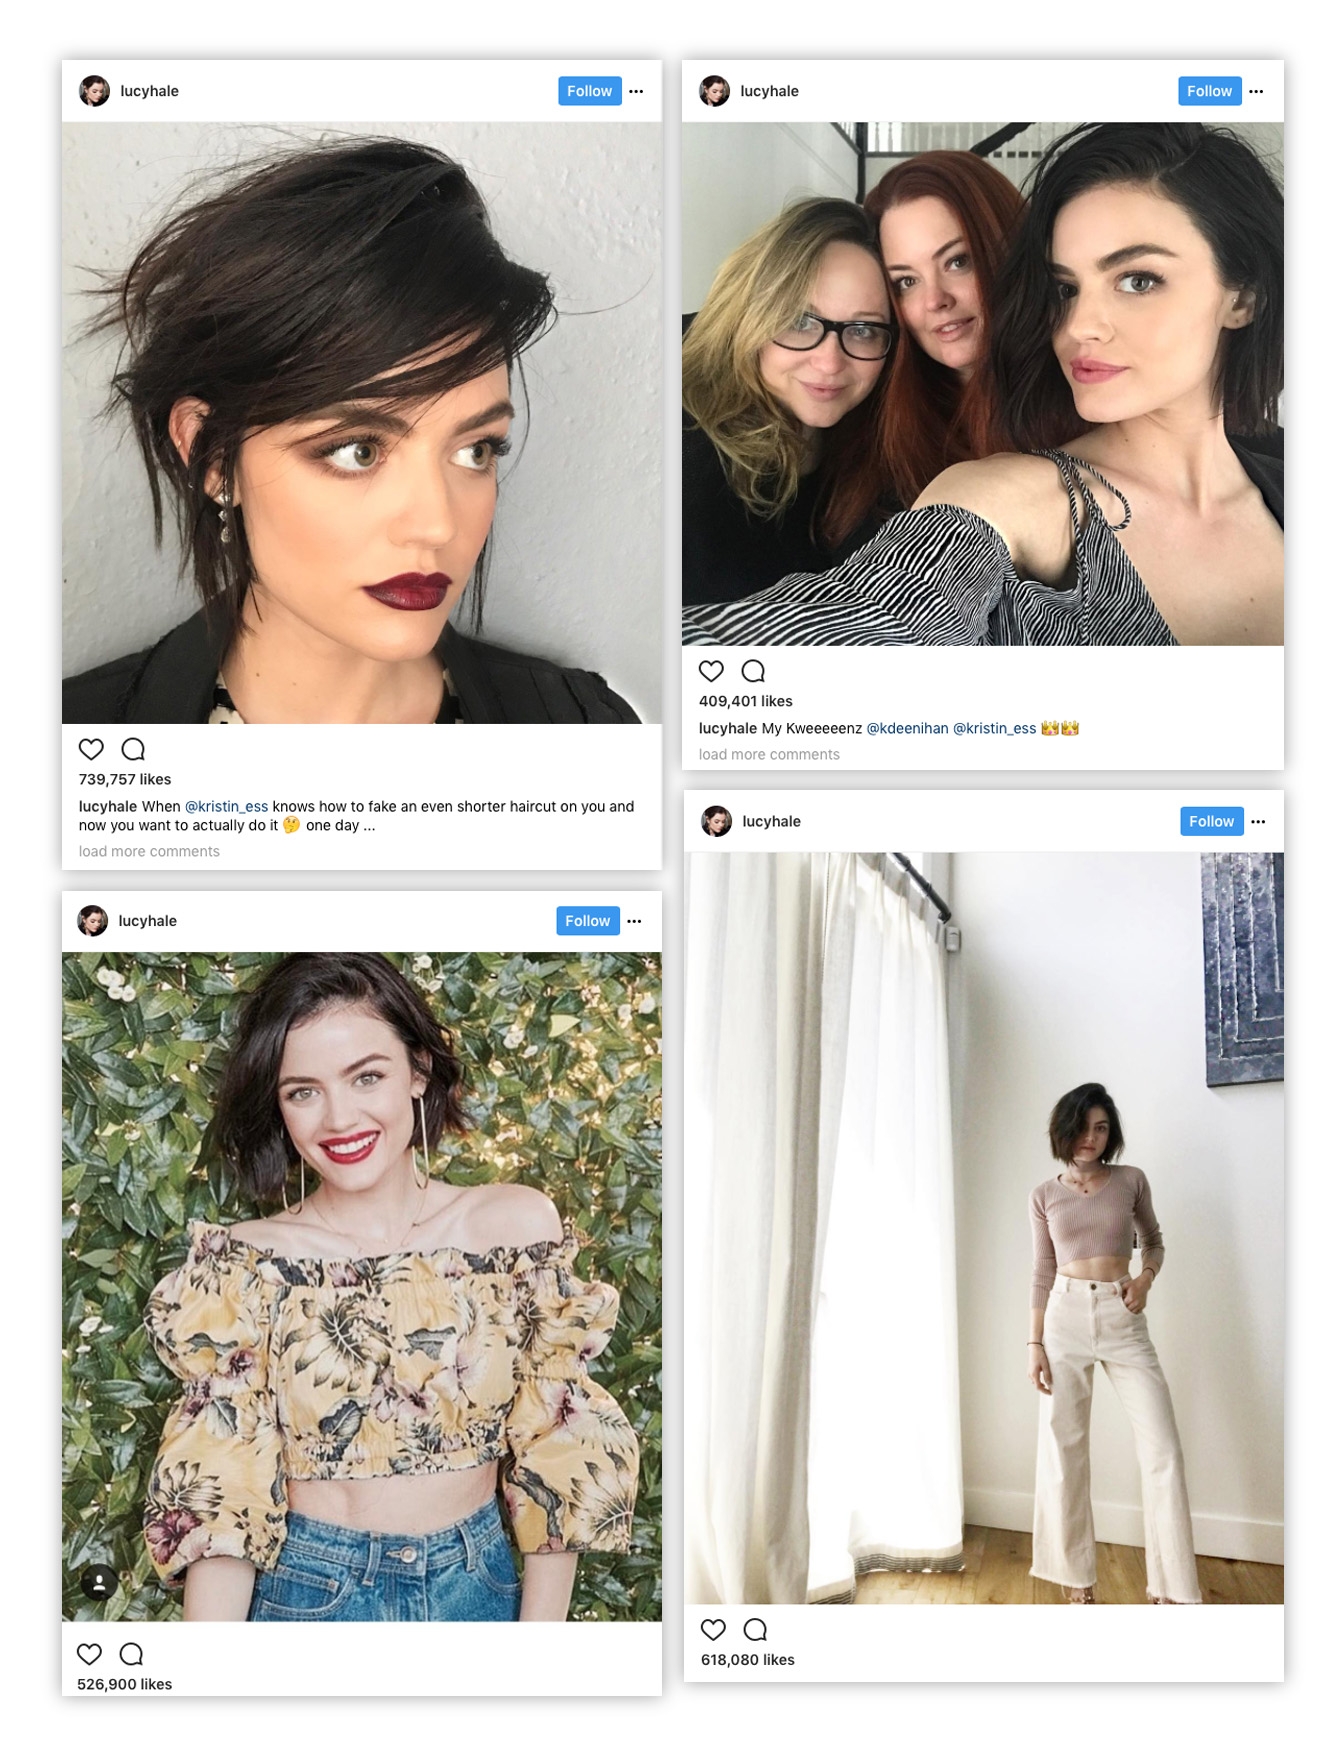 Pretty Little Liars Actress Lucy Hale Dyes Hair Black | Teen Vogue